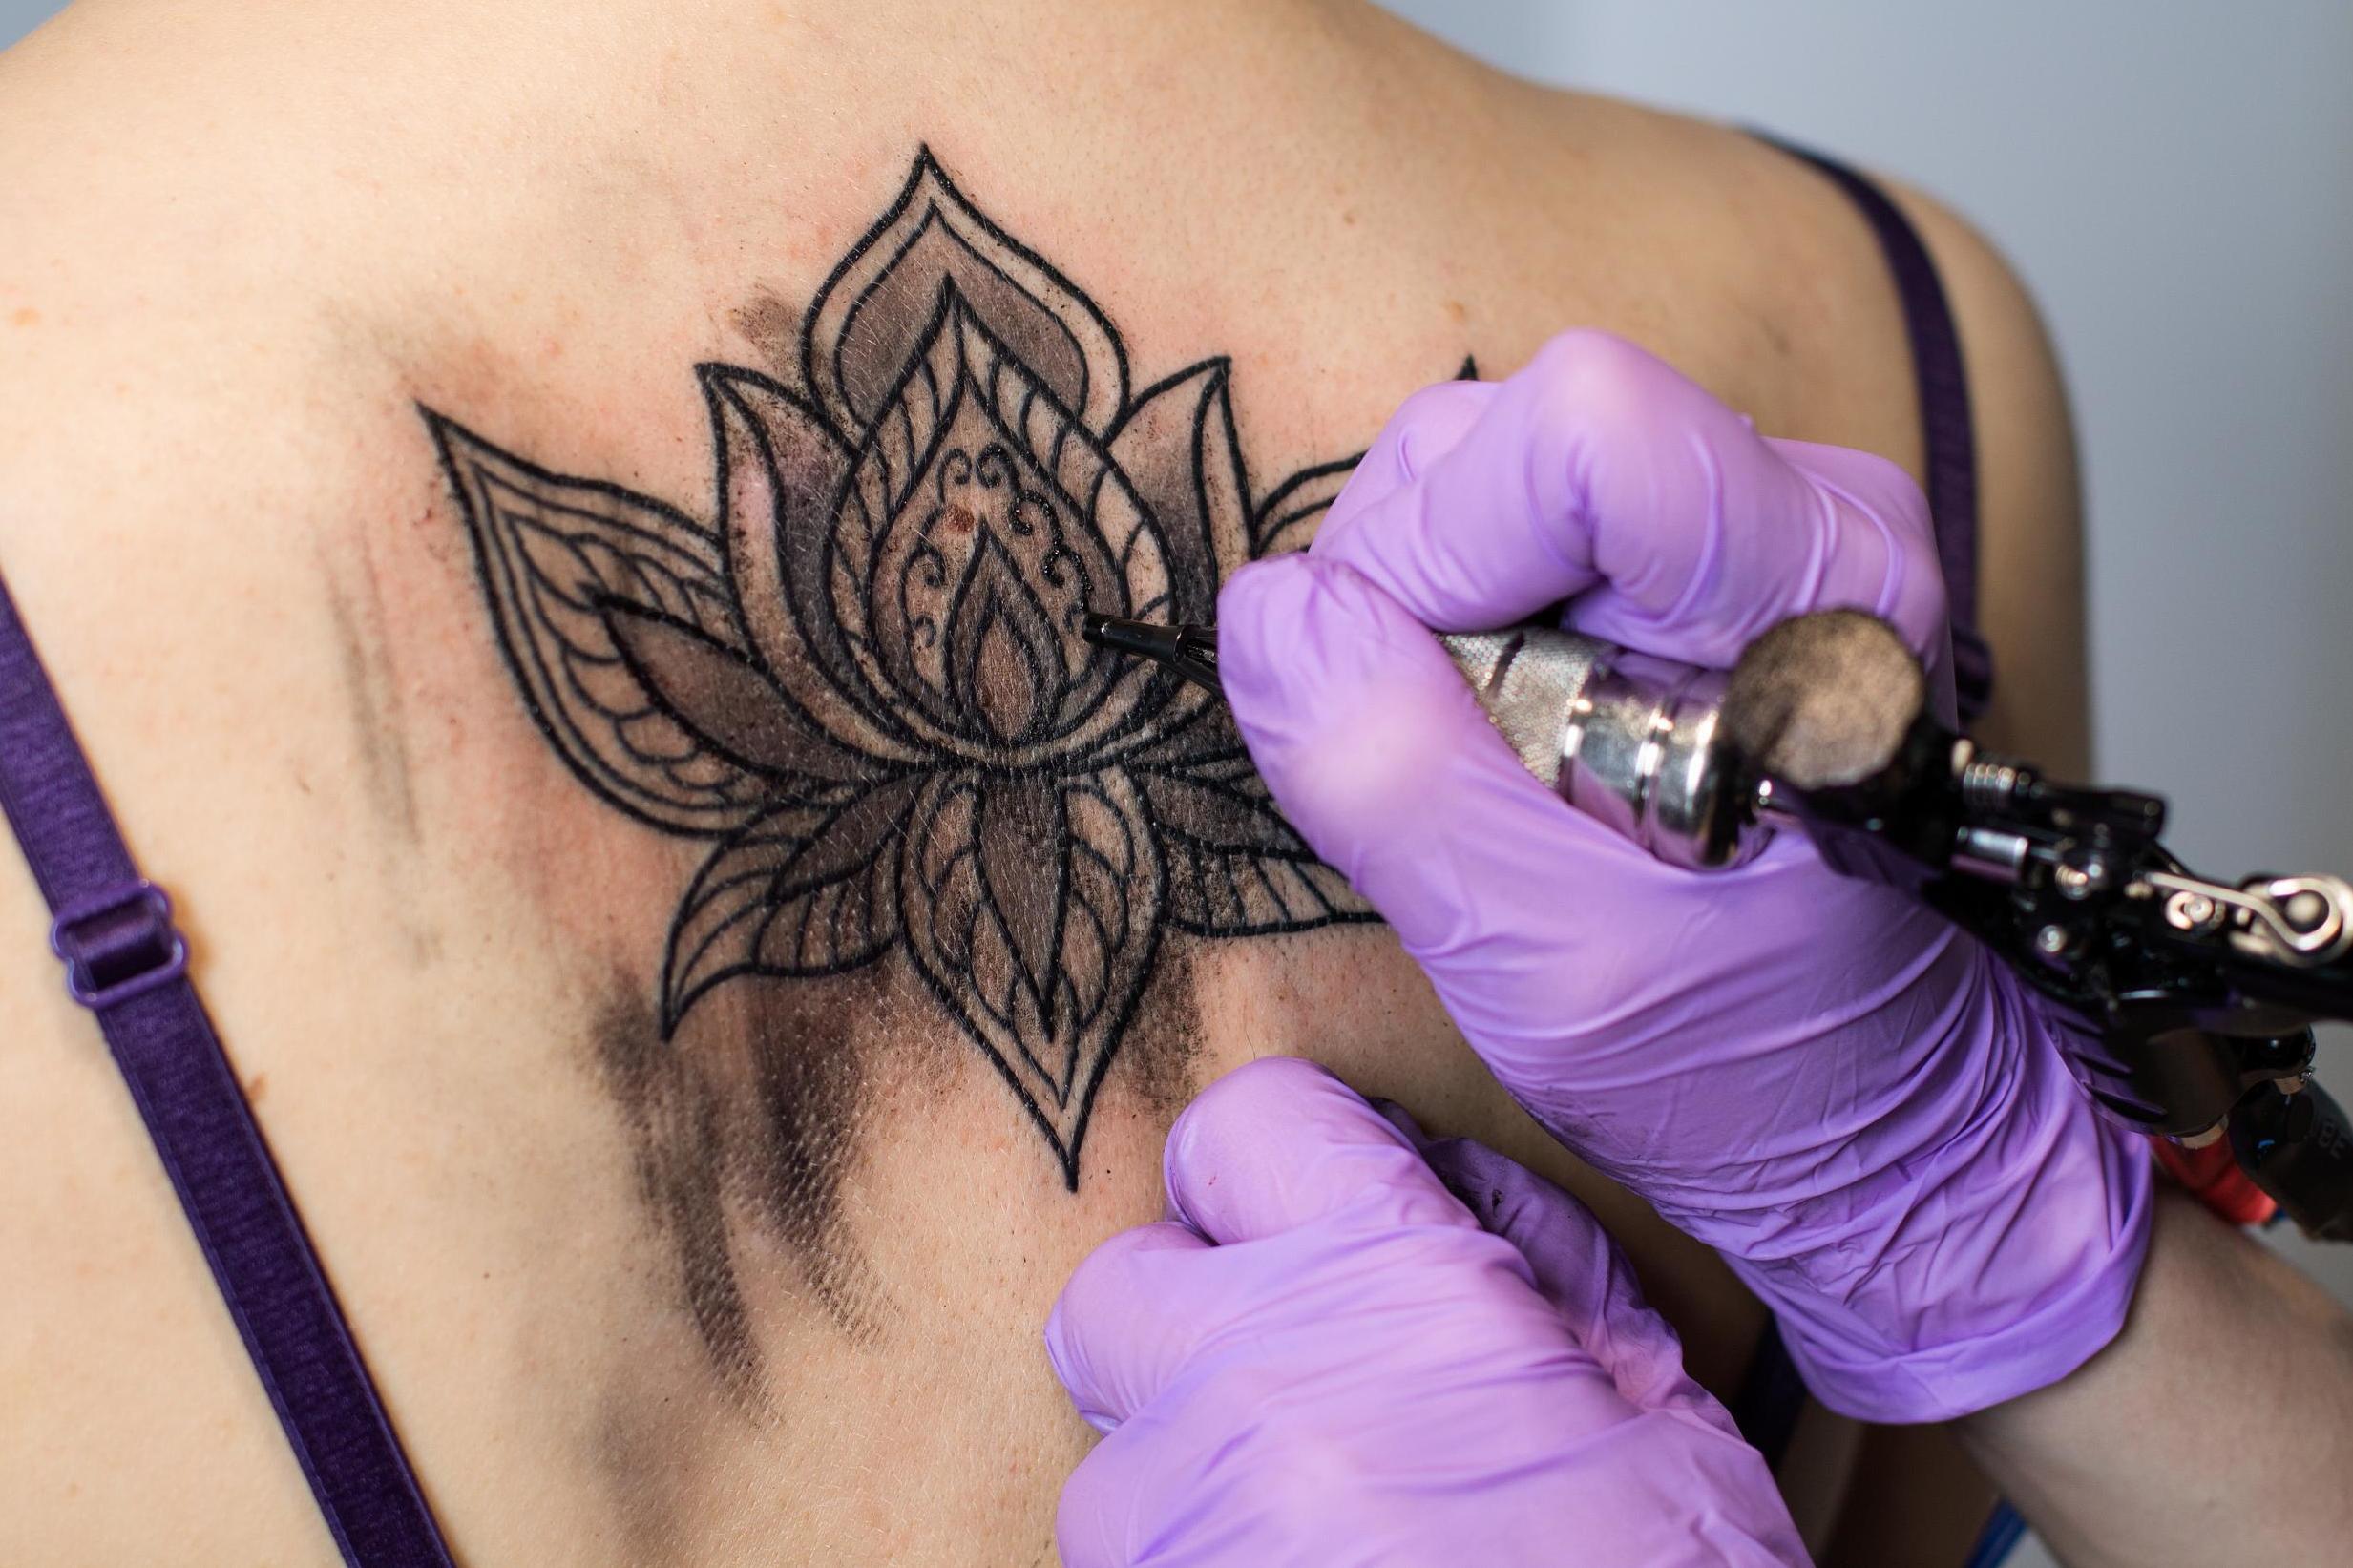 How to choose the right tattoo for you, according to tattoo artists